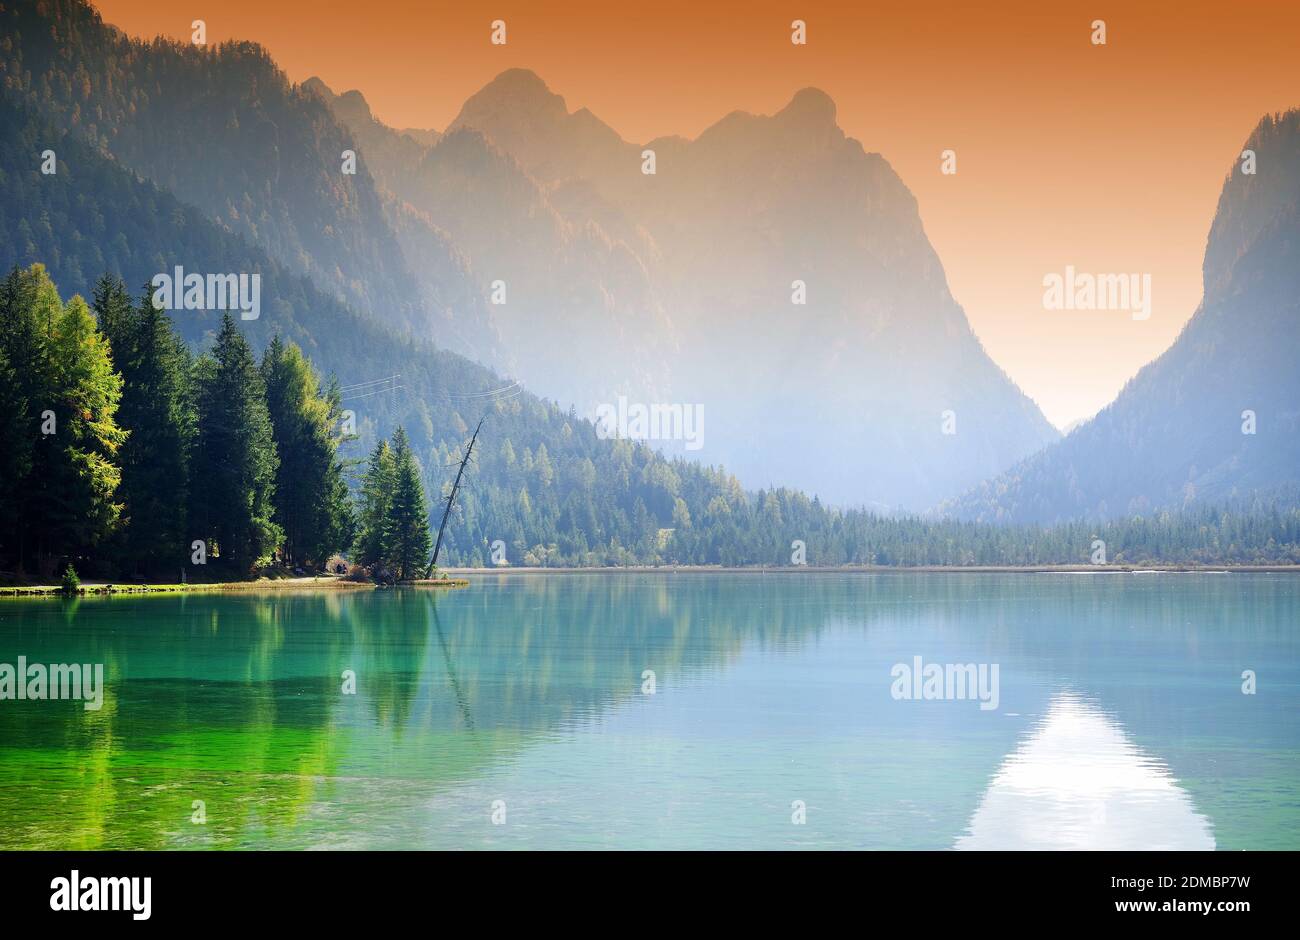 Panoramic View Of Lake And Mountains Against Sky During Sunset Stock Photo